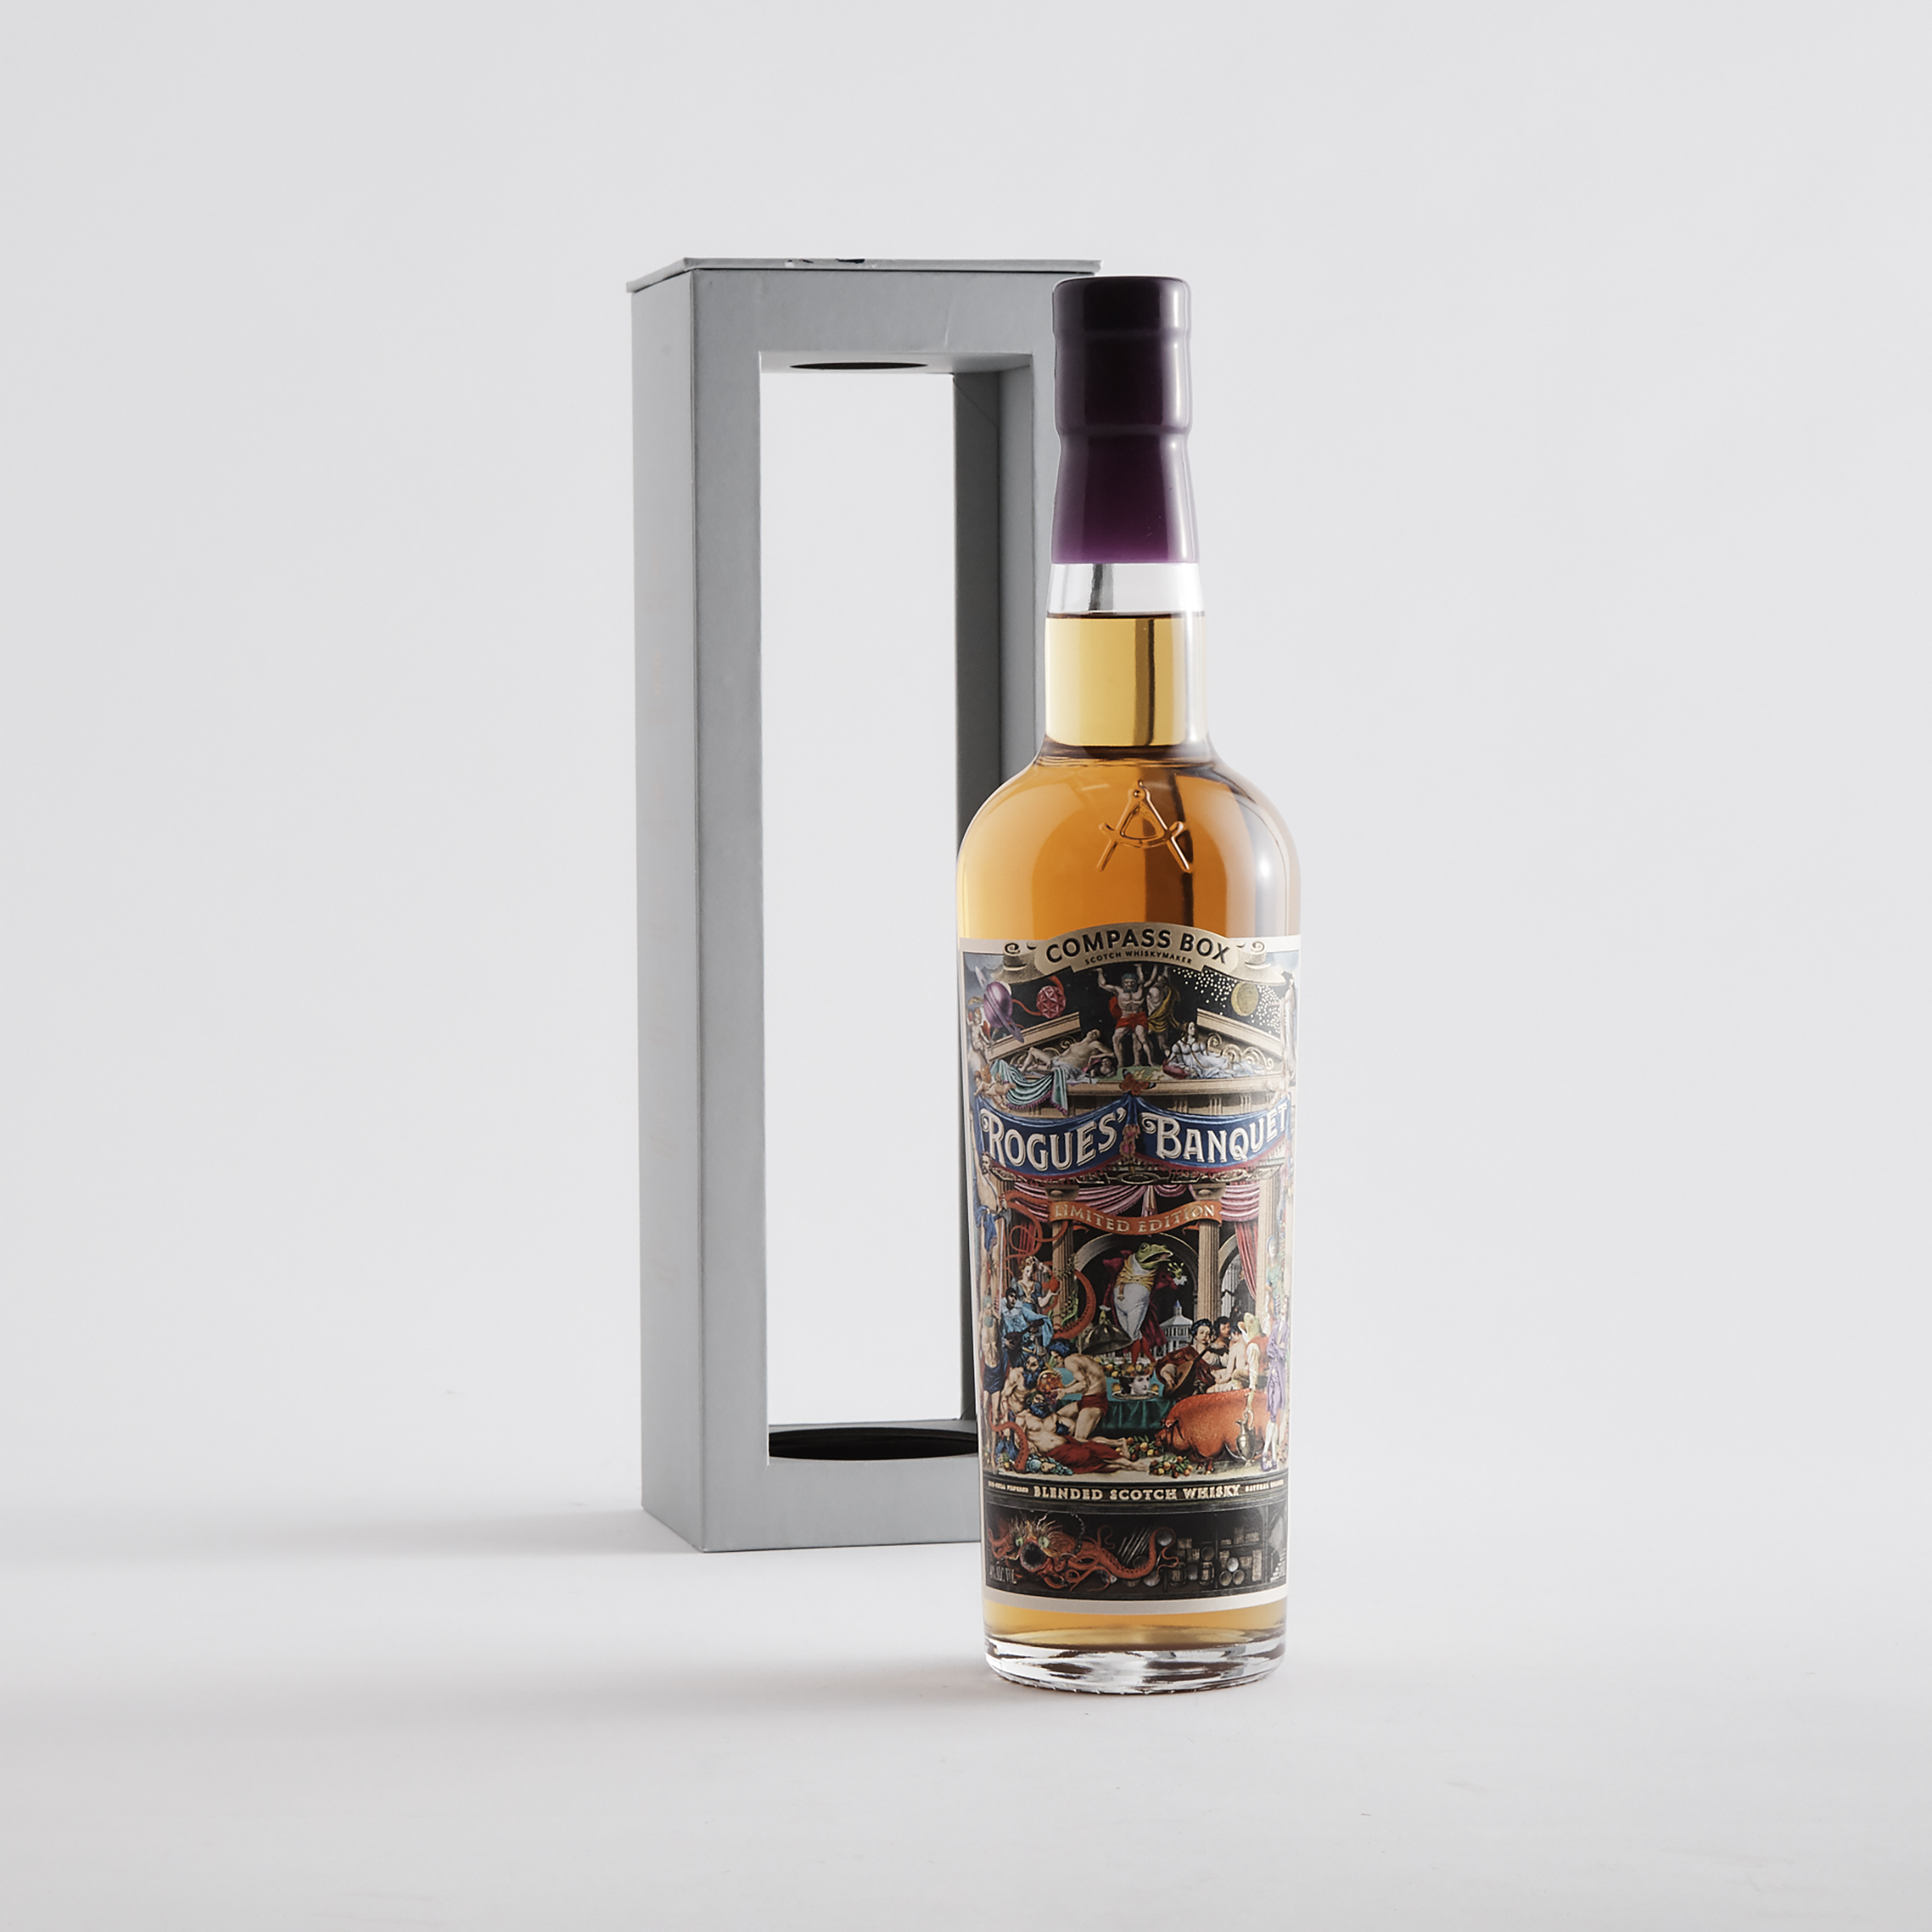 COMPASS BOX BLENDED SCOTCH WHISKY NAS (ONE 750 ML)